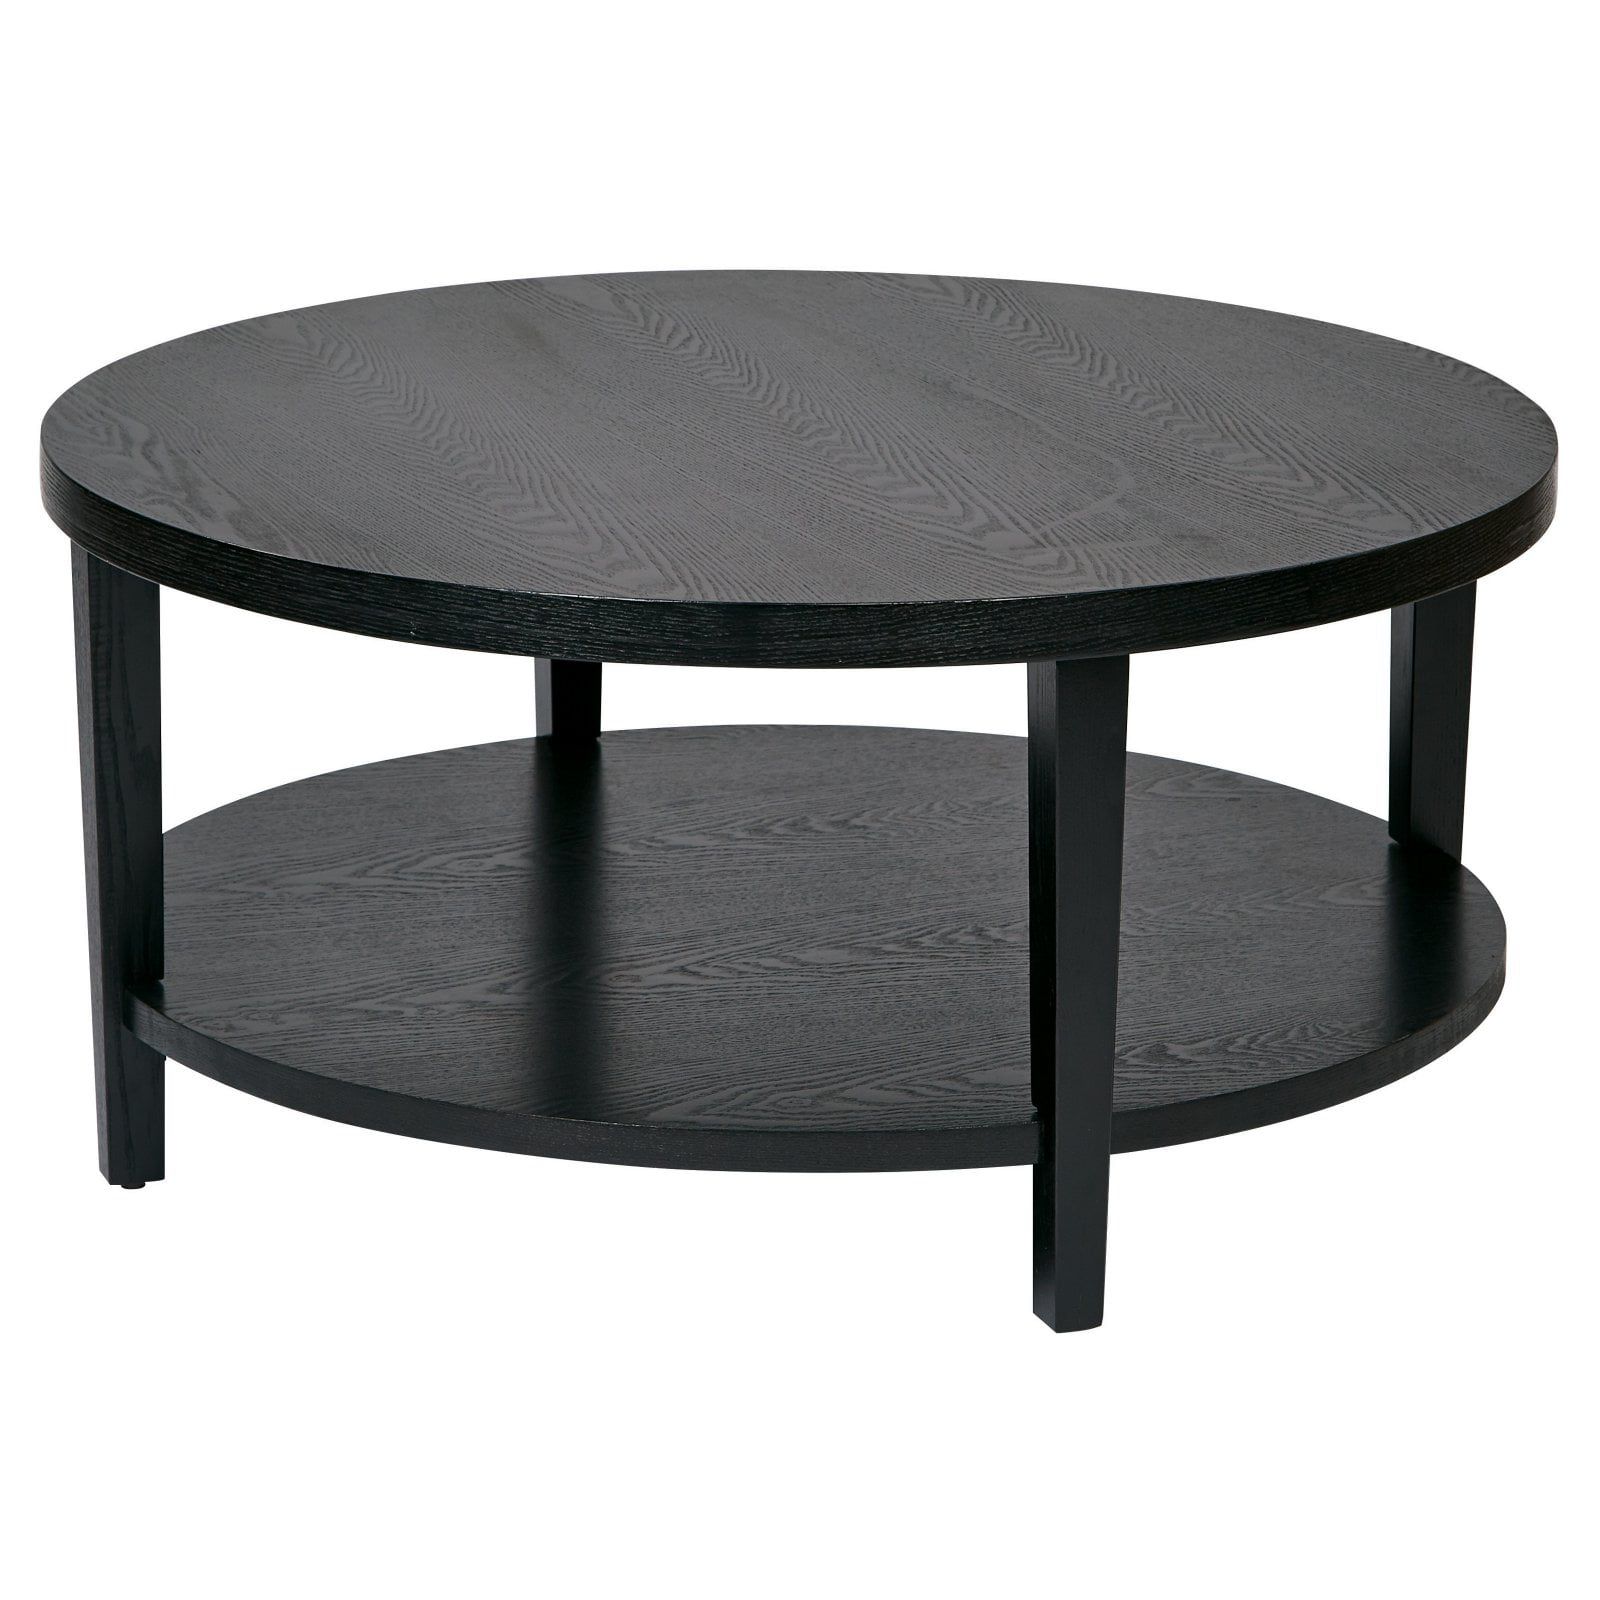 Osp Home Furnishings Work Smart Merge 36" Round Coffee Table (View 3 of 20)